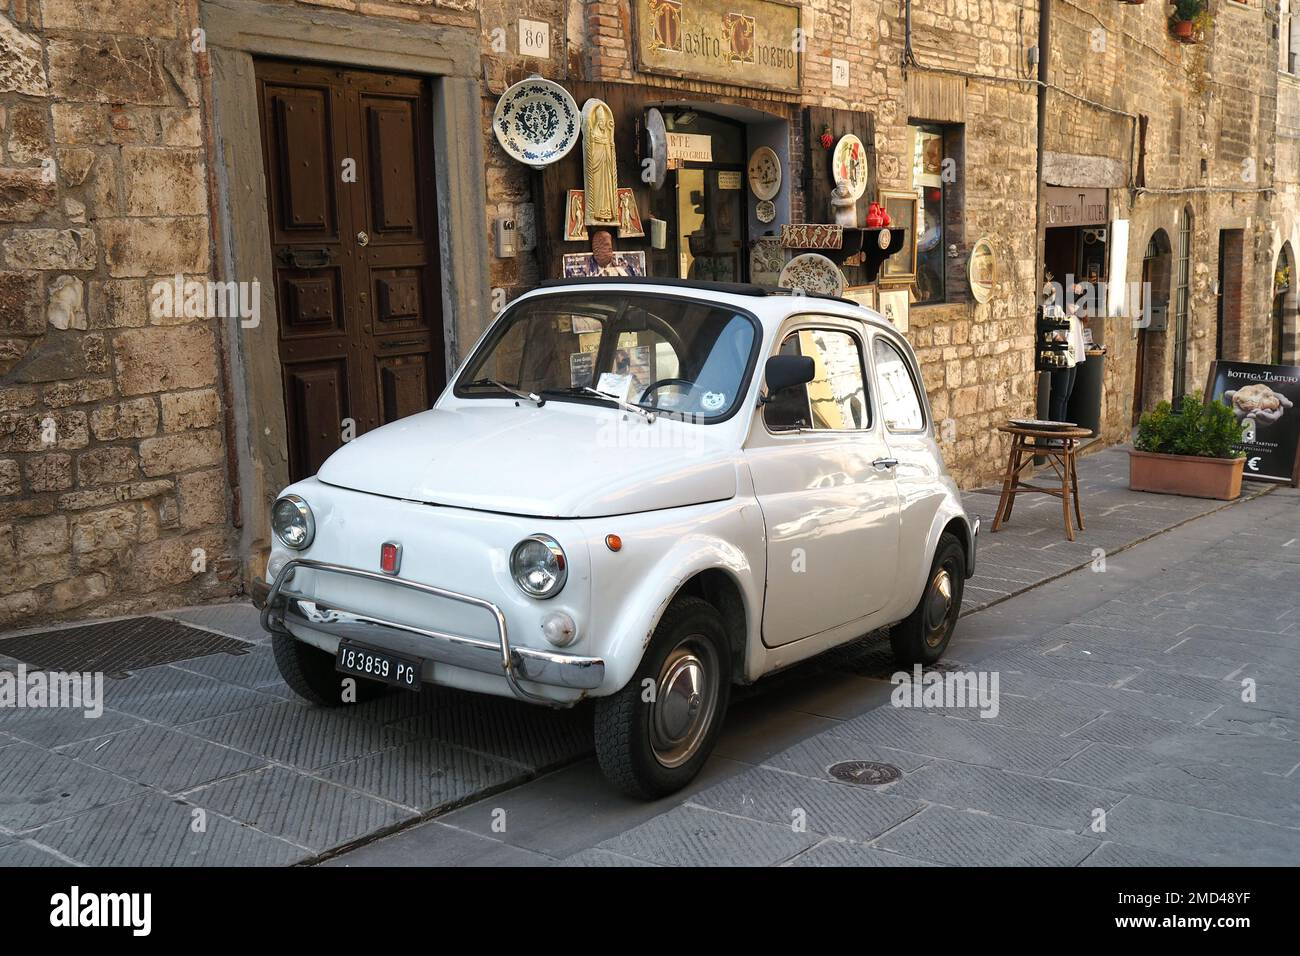 iconic Italian car 'Fiat 500' parked in the medieval village of Gubbio, Umbria region, Italy Stock Photo